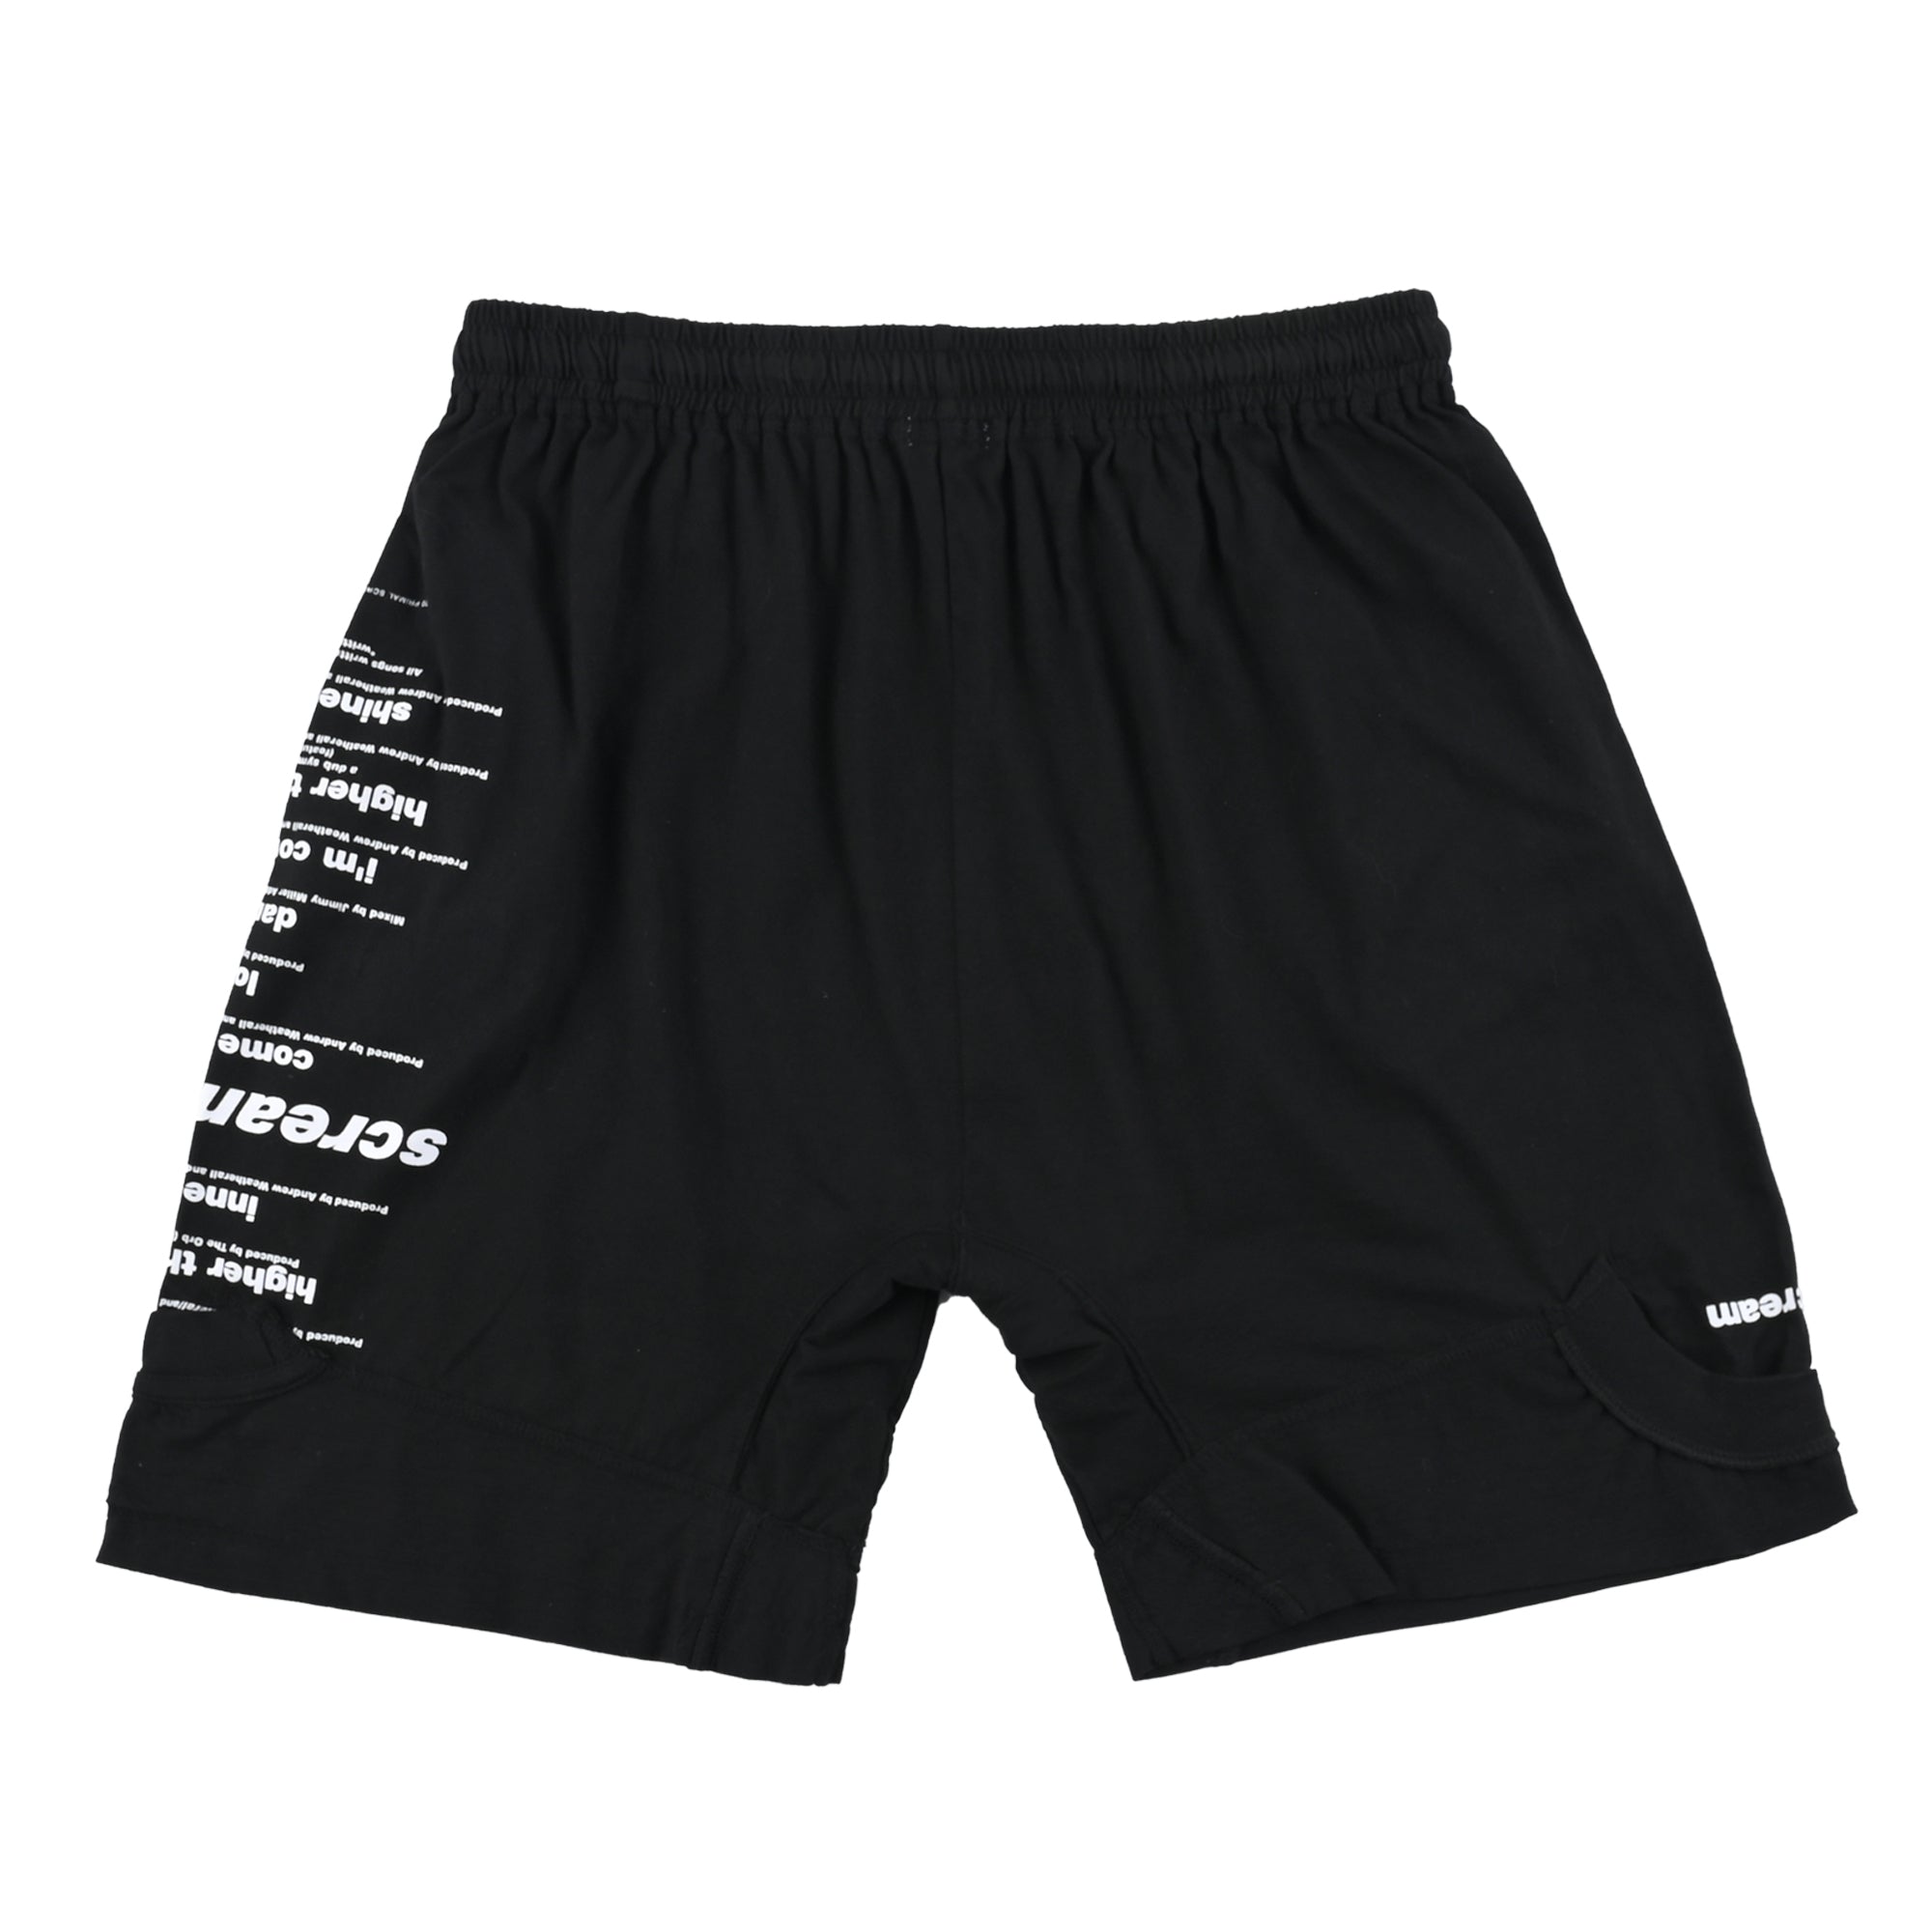 The Salvages x Old Park Reconstructed T-shirt Shorts in Black